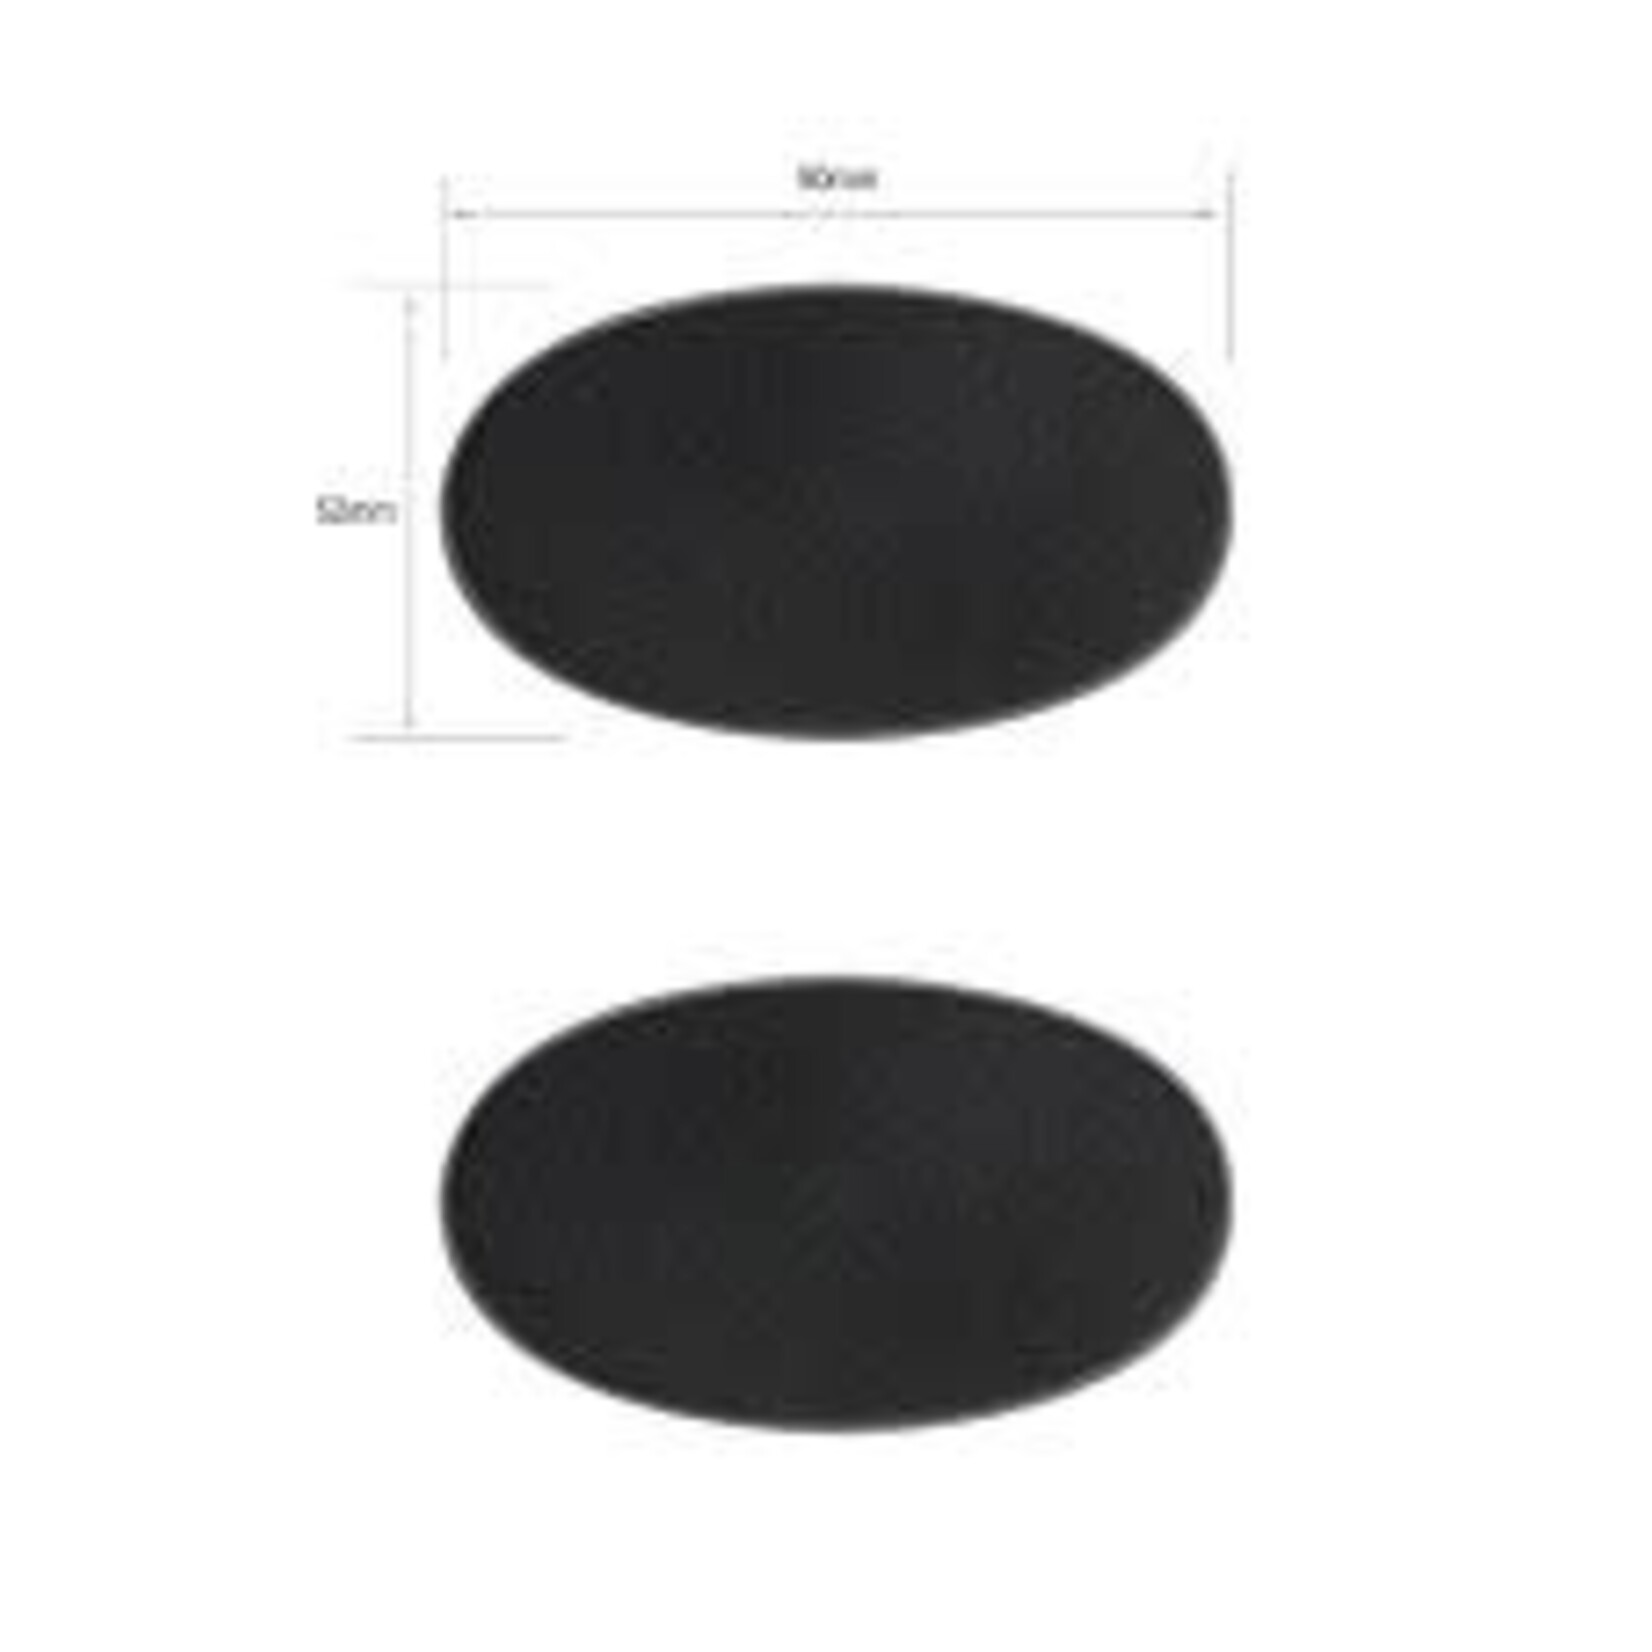 Citadel 90x52mm Oval Bases (2pc)